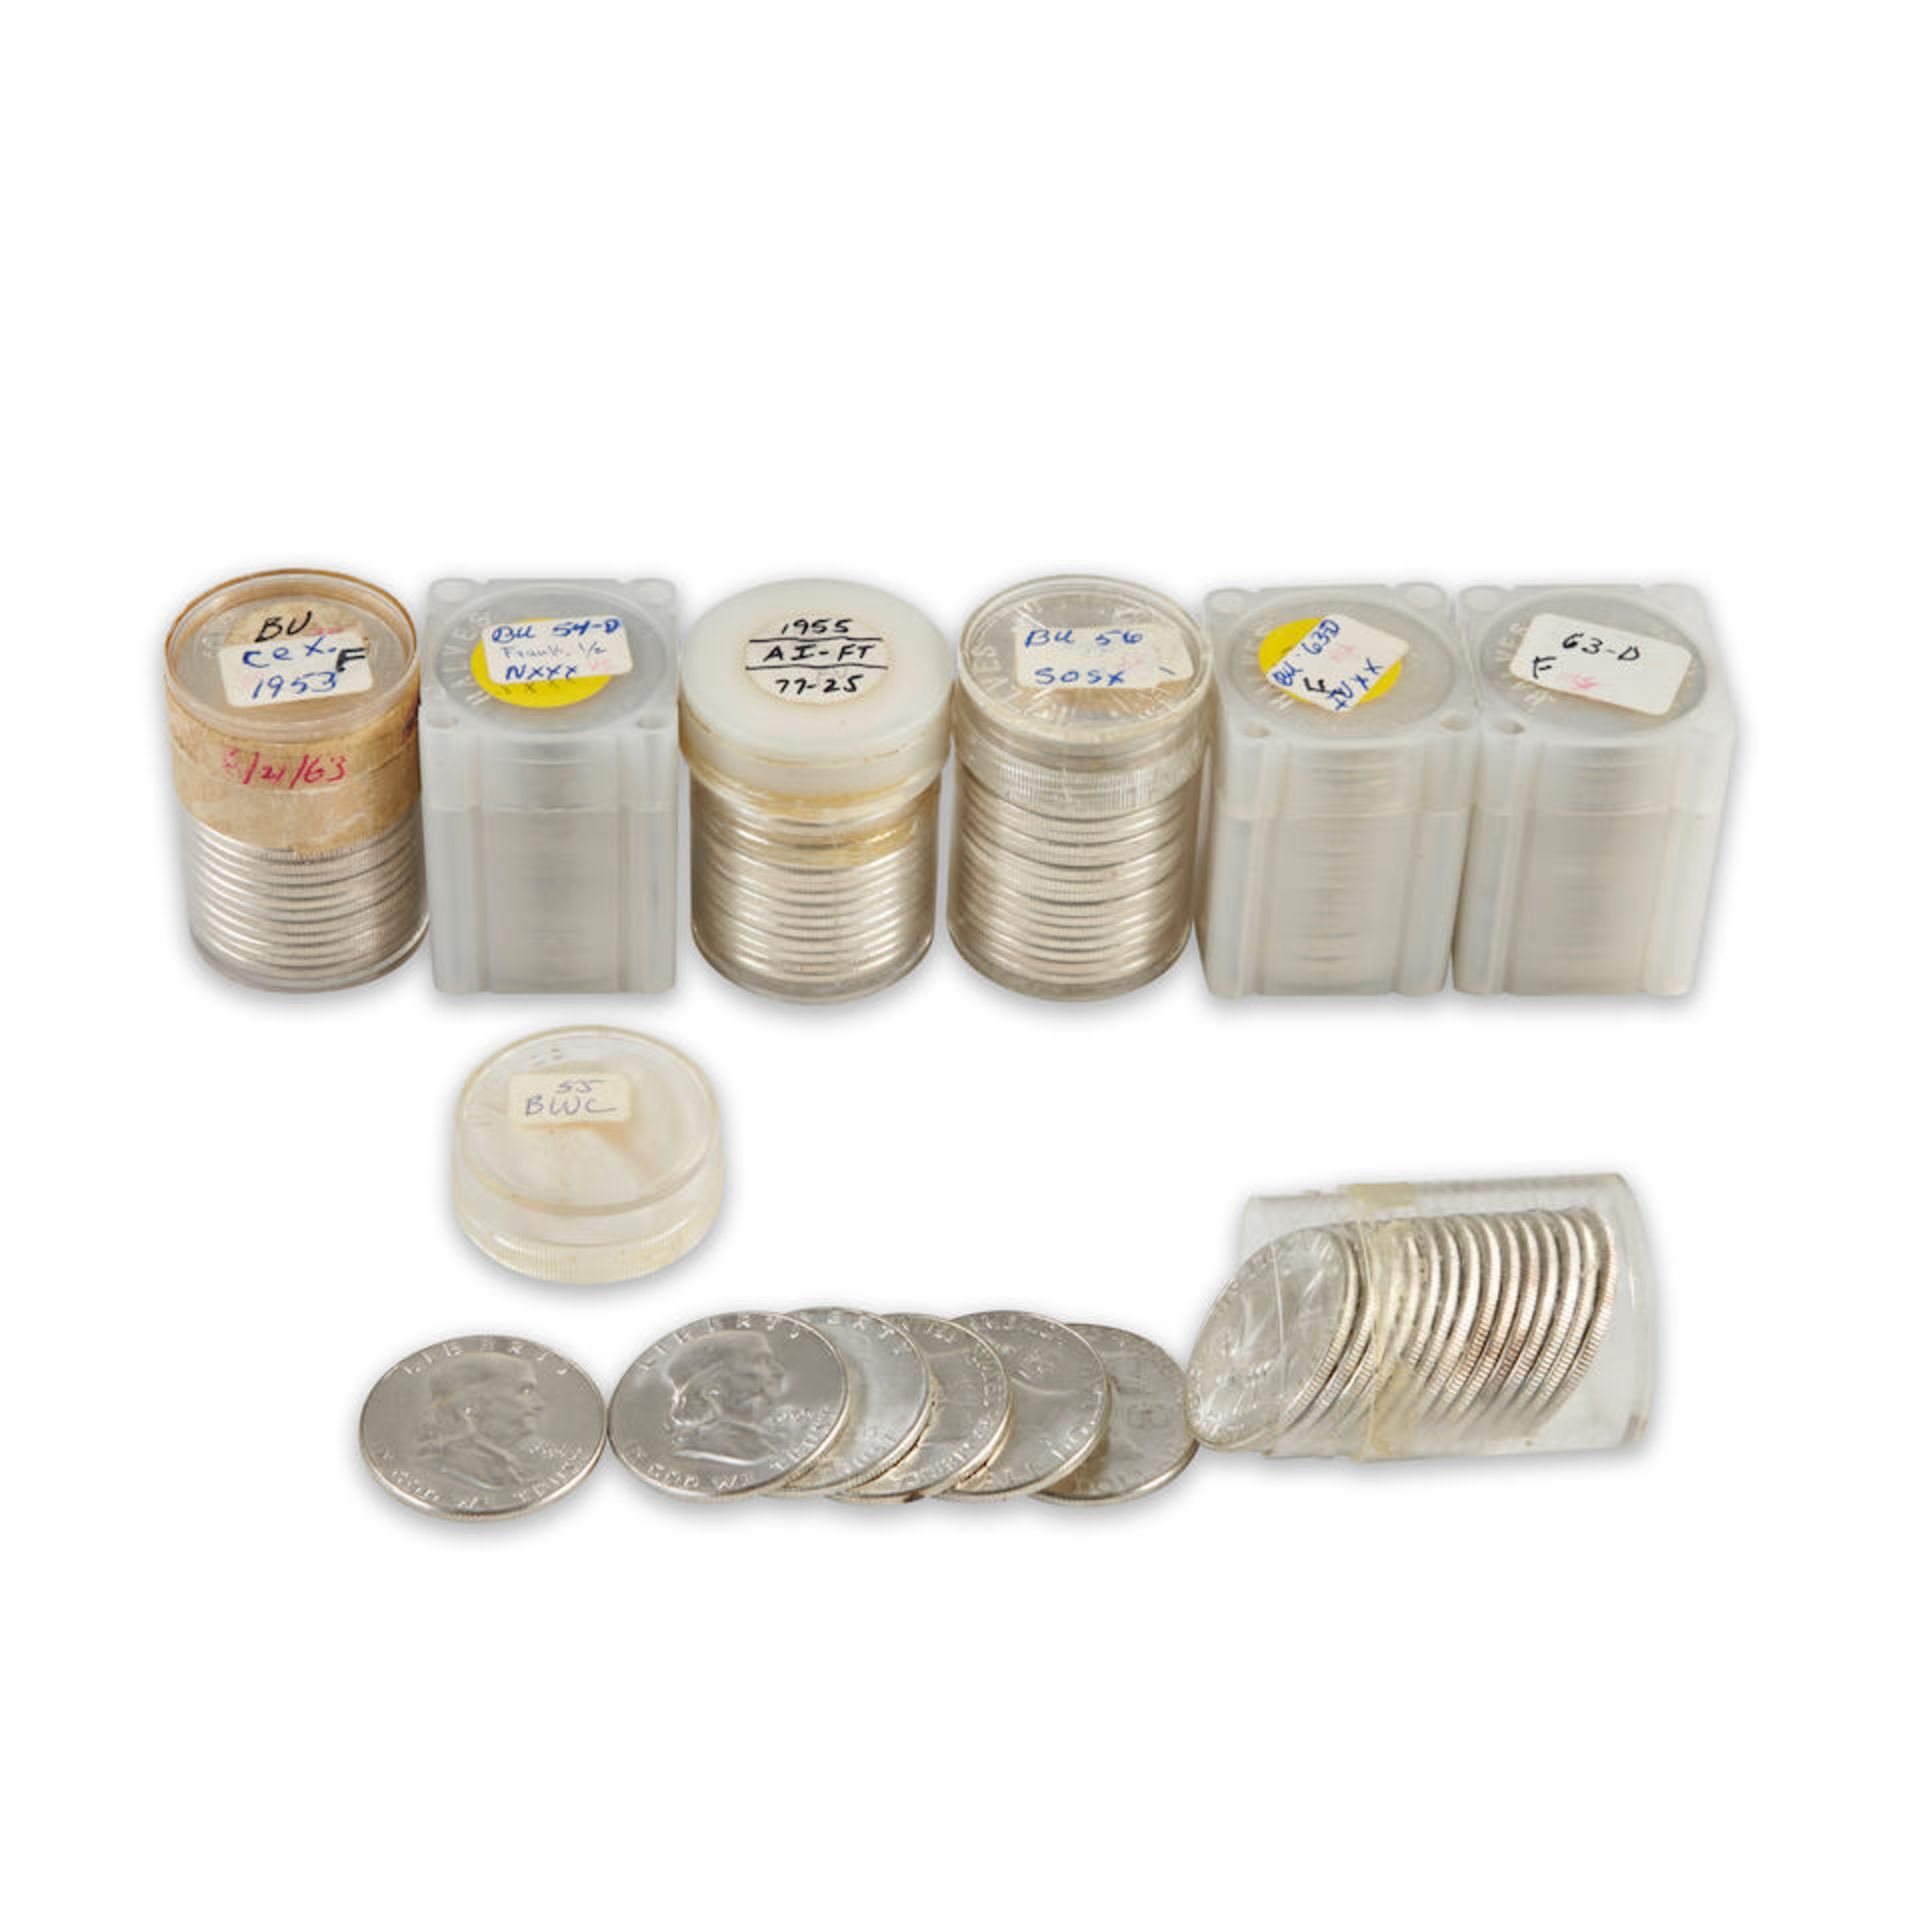 United States Seven Franklin Half Dollar Uncirculated/Brilliant Uncirculated Coin Rolls.